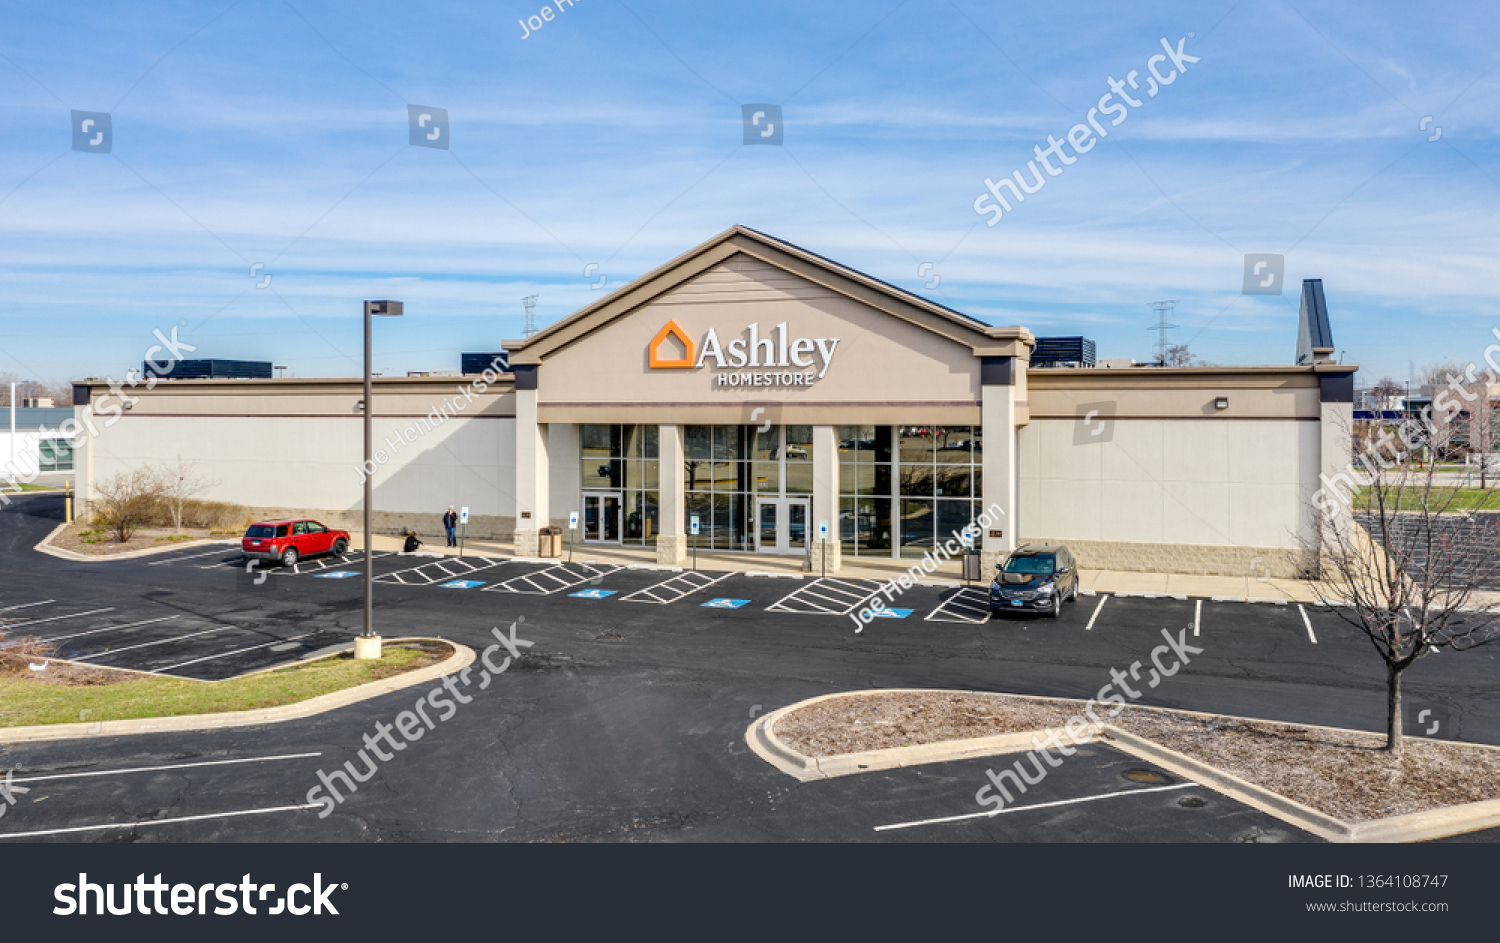 Ashley Furniture Images Stock Photos Vectors Shutterstock